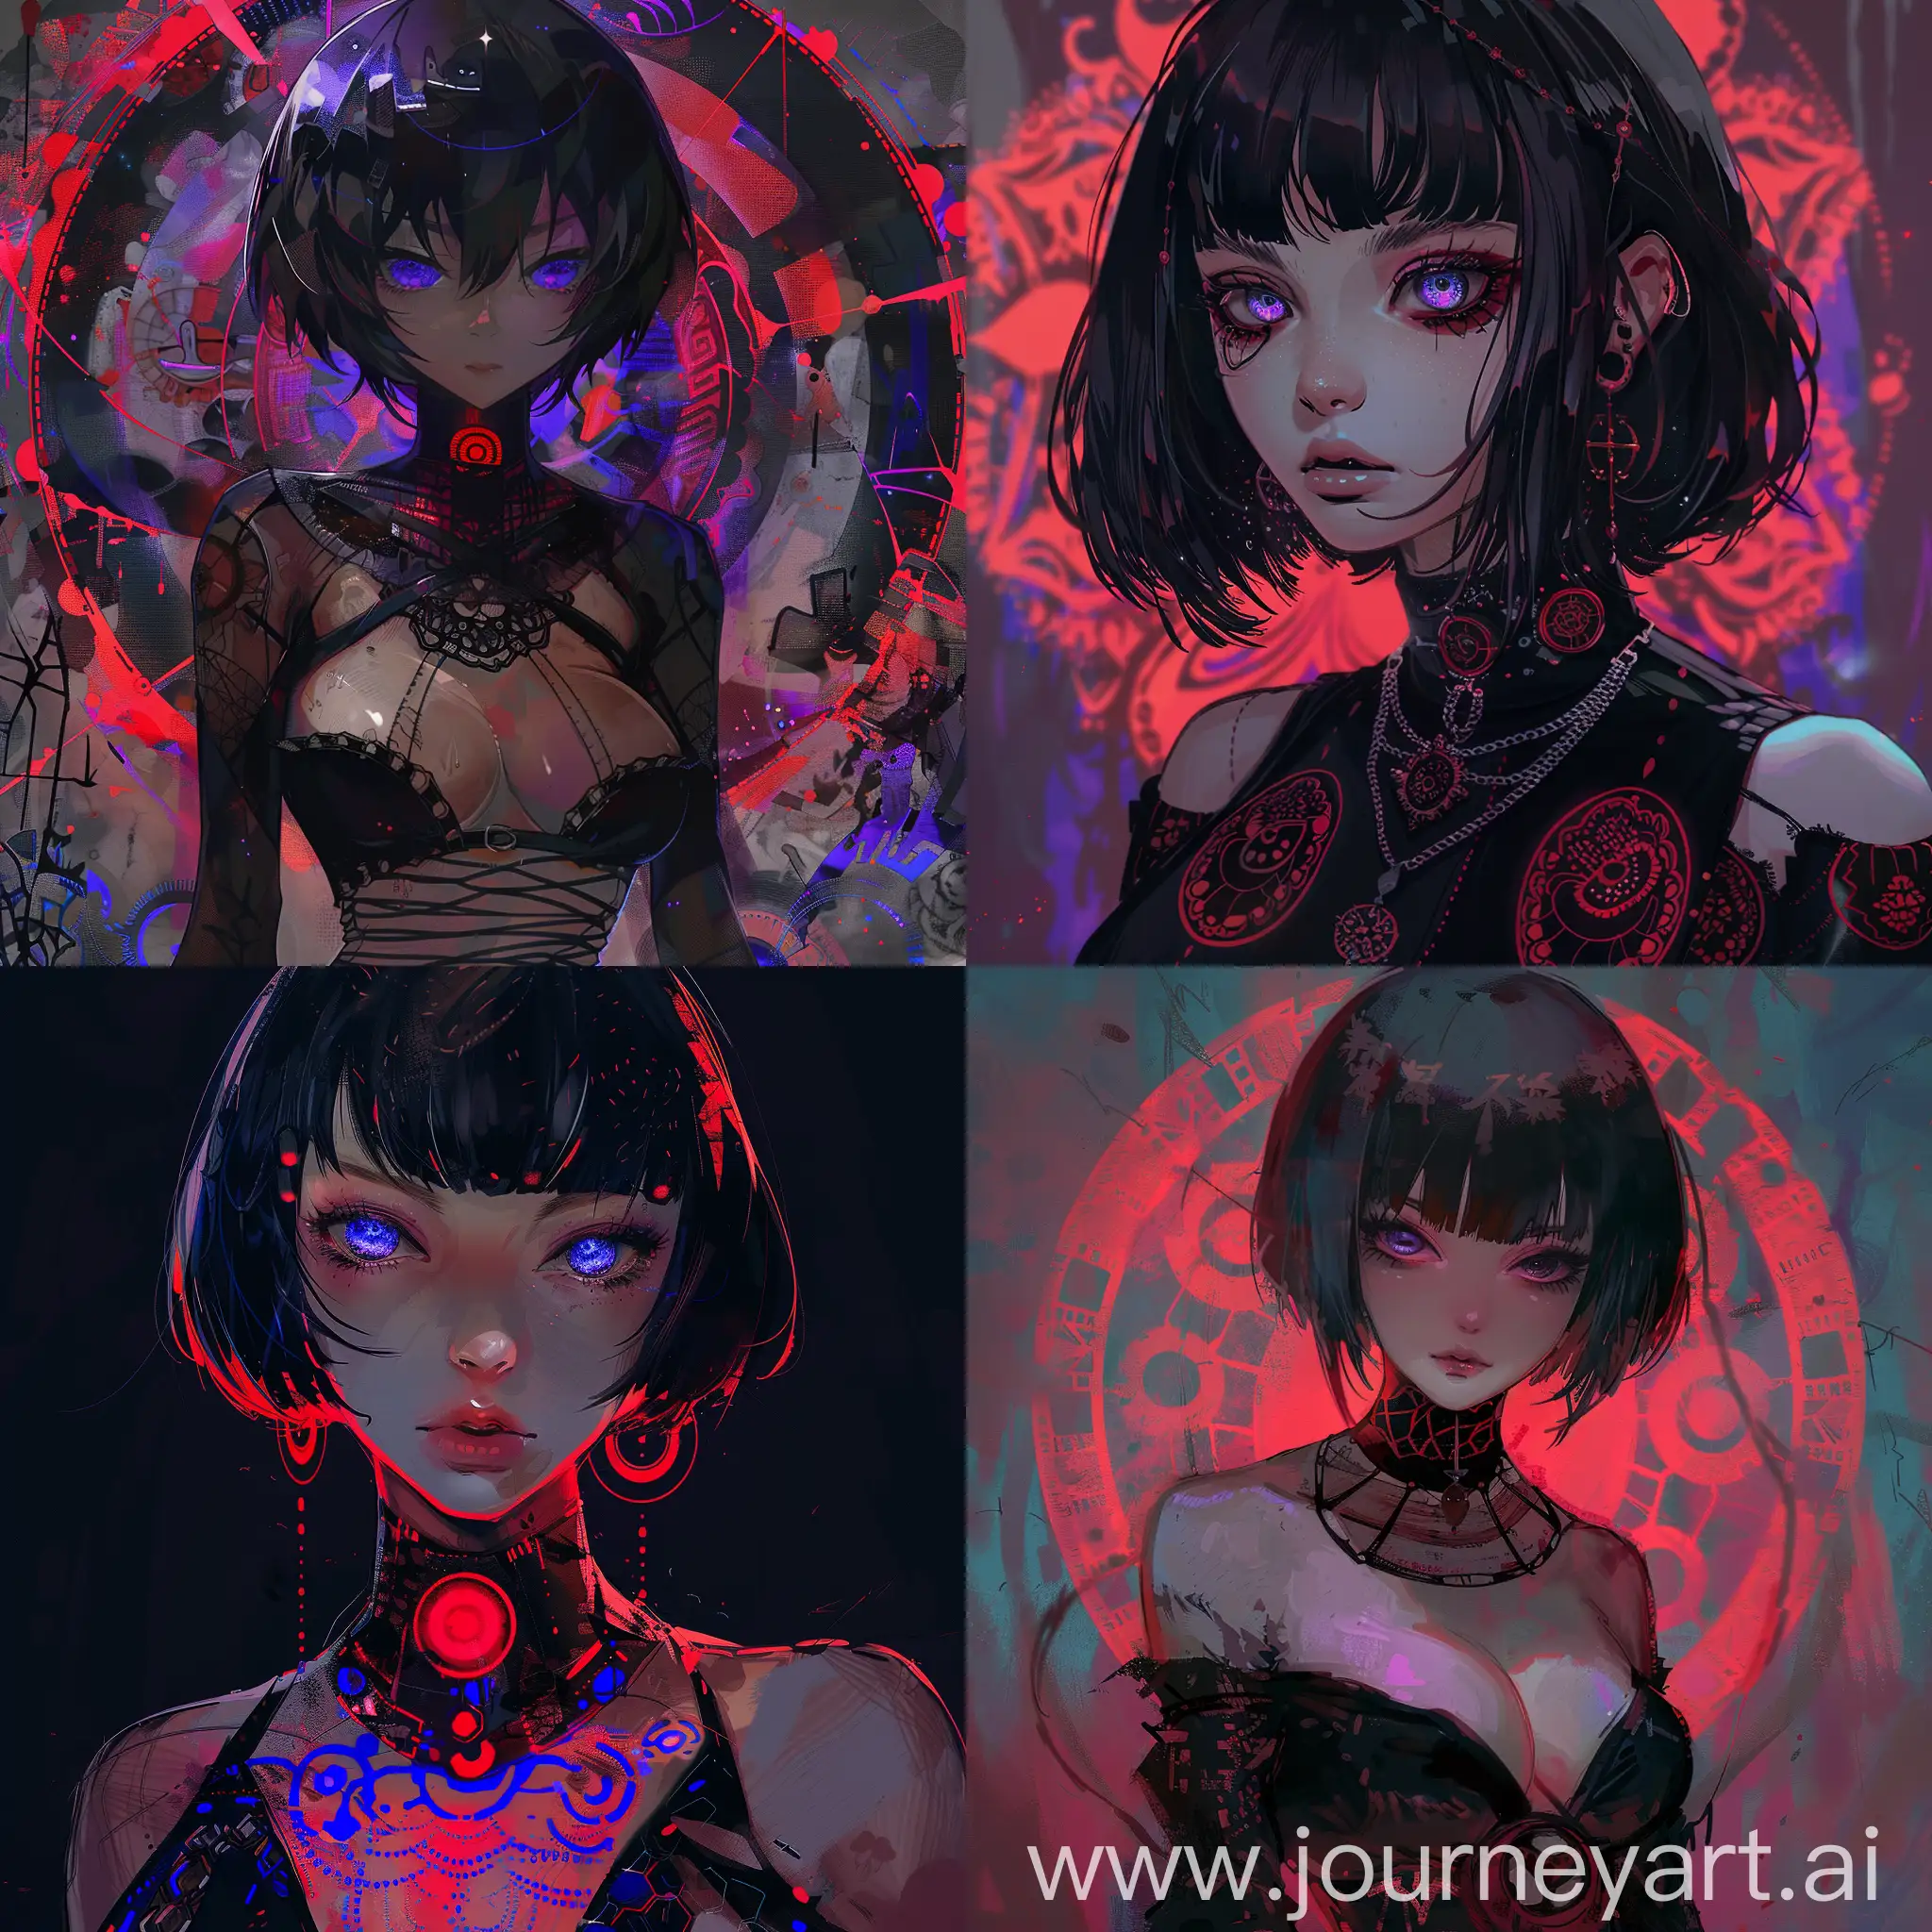 The girl is tall, of medium build, with large breasts, short black hair, she is dressed in black clothes with red patterns, her eyes are blue with purple patterns in the shape of circles.